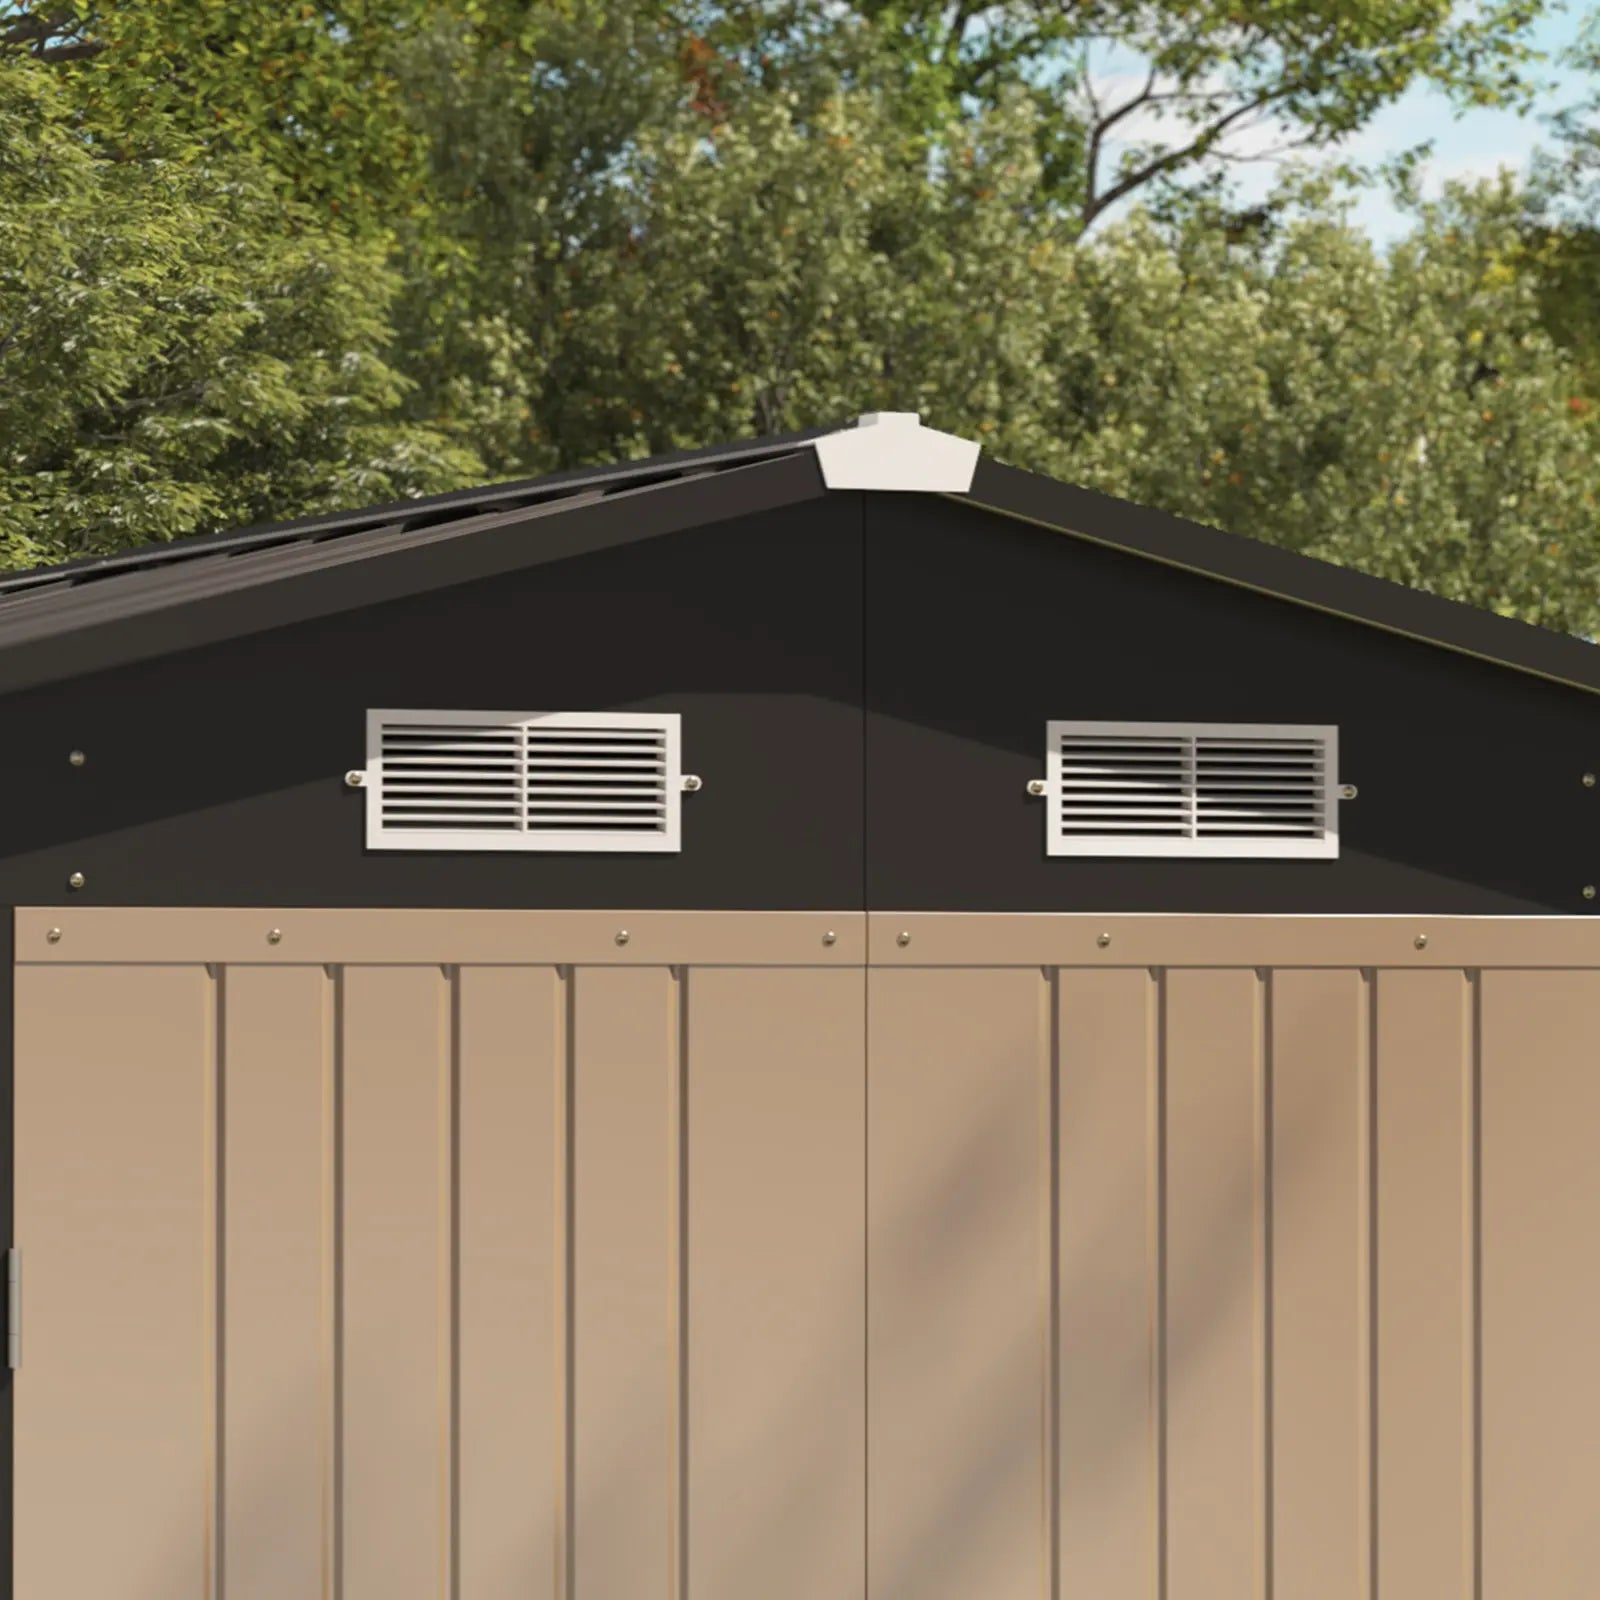 Patiowell 10x12 Metal Shed -Air Vents